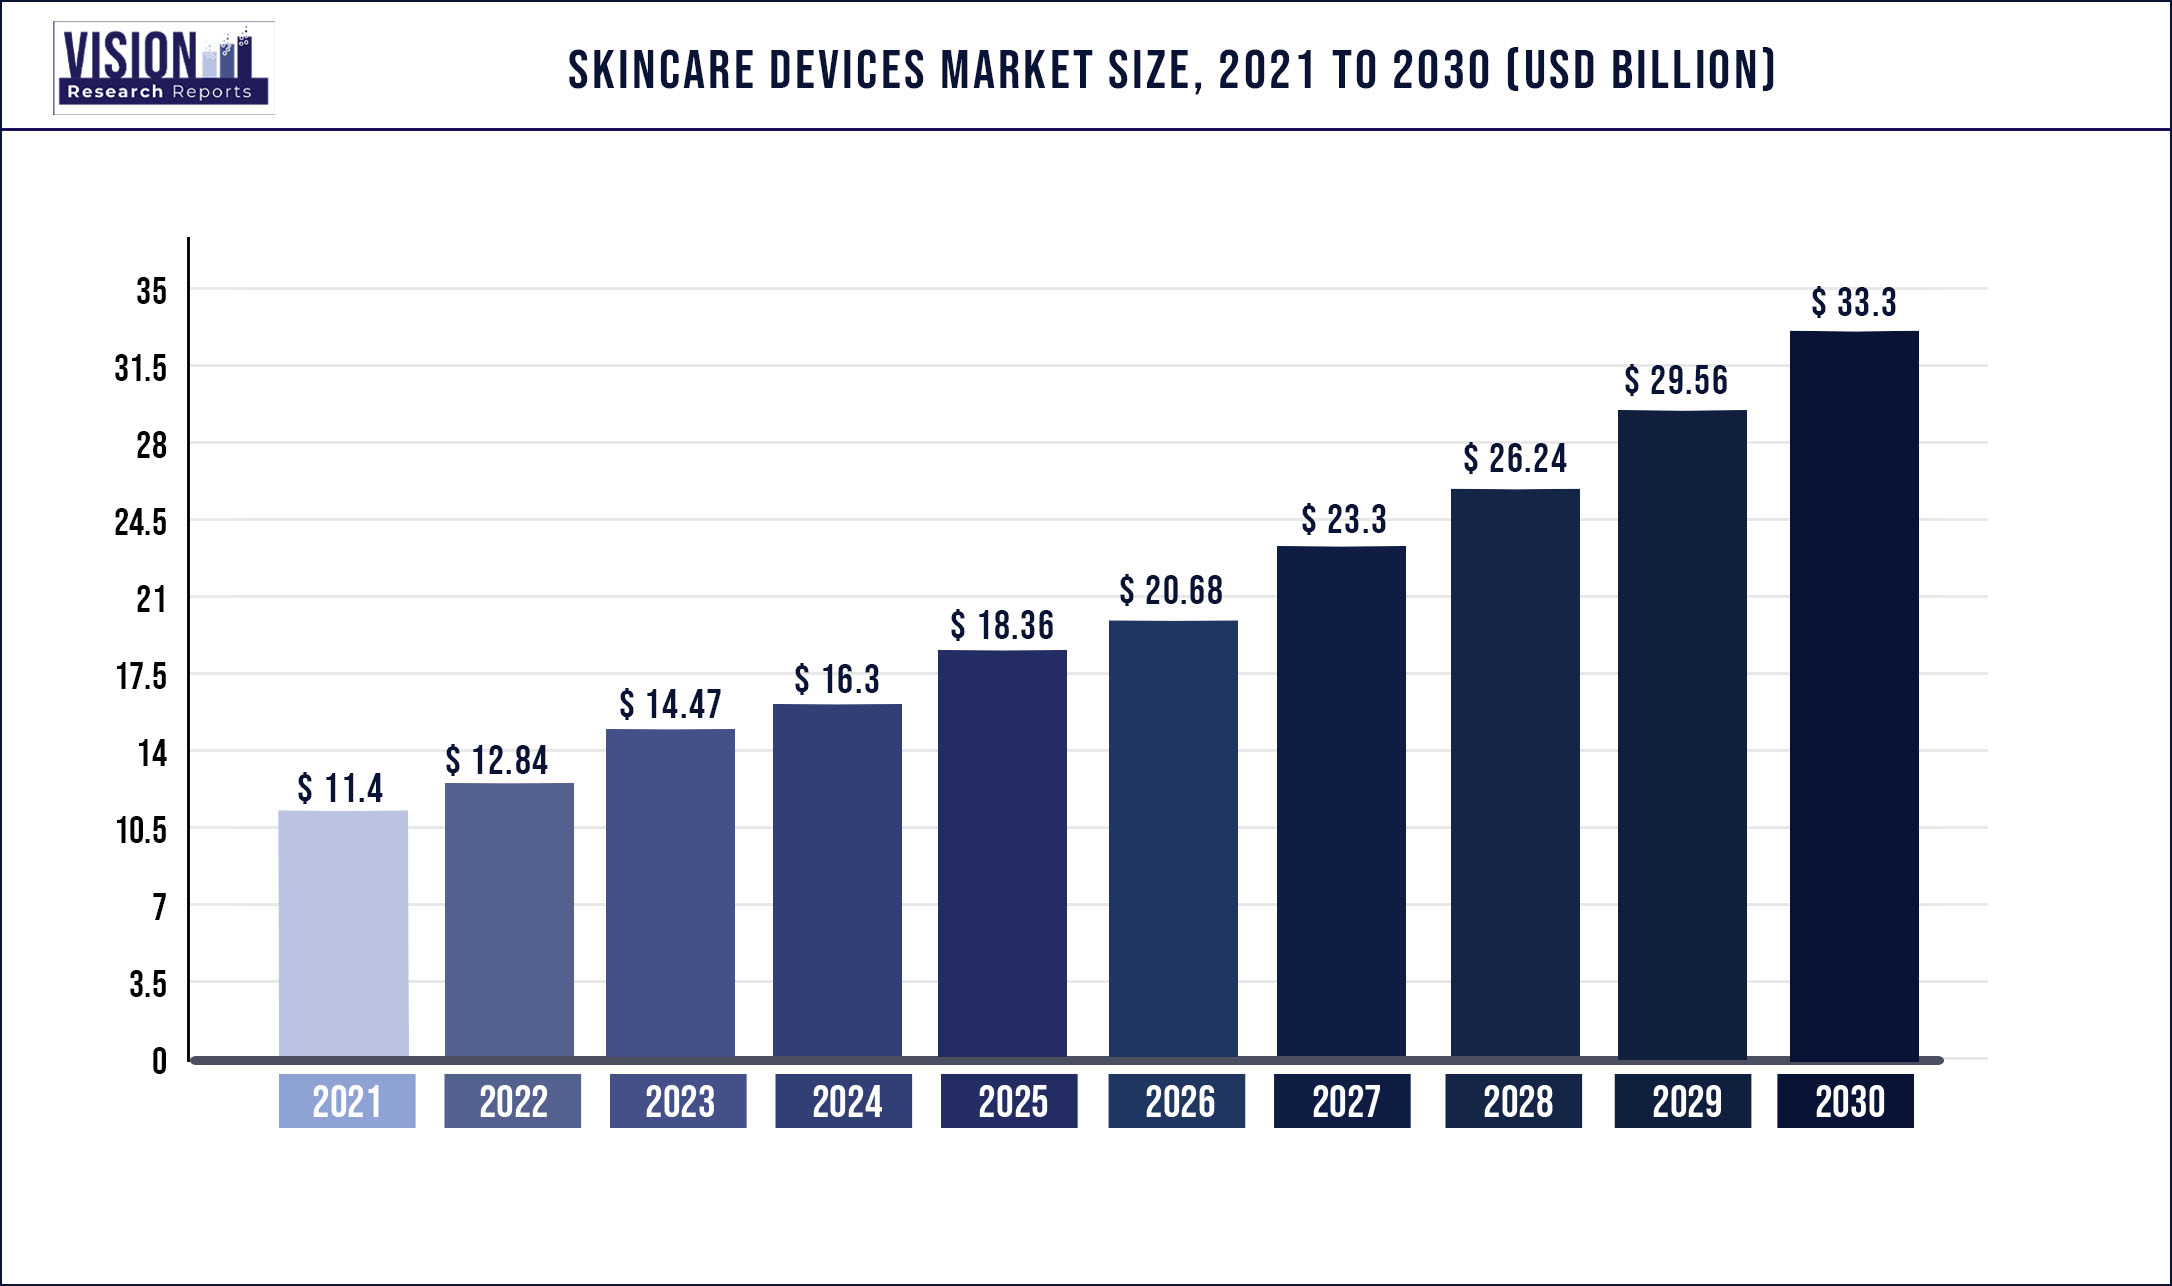 Skincare Devices Market Size 2021 to 2030